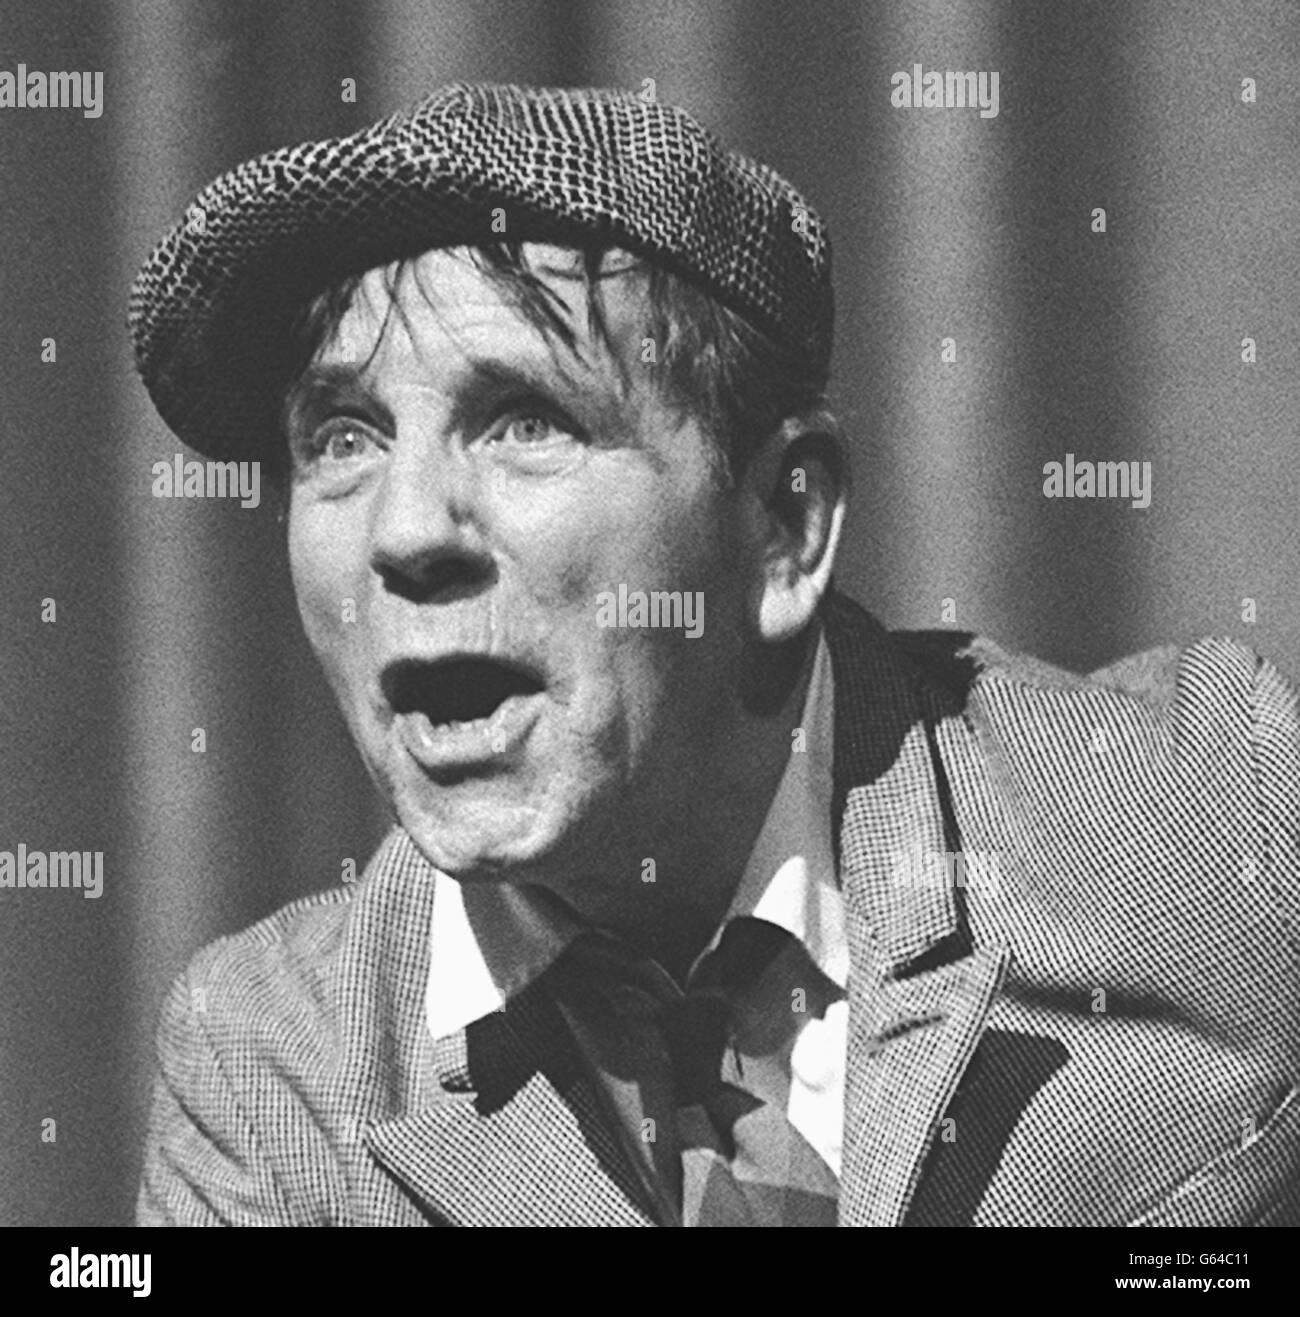 Comedian and actor Norman Wisdom. * 27/5/1992: veteran entertainer Norman Wisdom who celebrates his 75th birthday on Saturday 4.2.95 6/6/2000: Sir Norman Wisdom who will be at London's Buckingham Palace later Tuesday June 6, 2000, to receive his Knighthood. Sir Norman, 85, famous for playing the downtrodden little man in a cloth cap and ill-fitting suit, is thought to be a favourite of the Queen and the 99-year-old Queen Mother Stock Photo